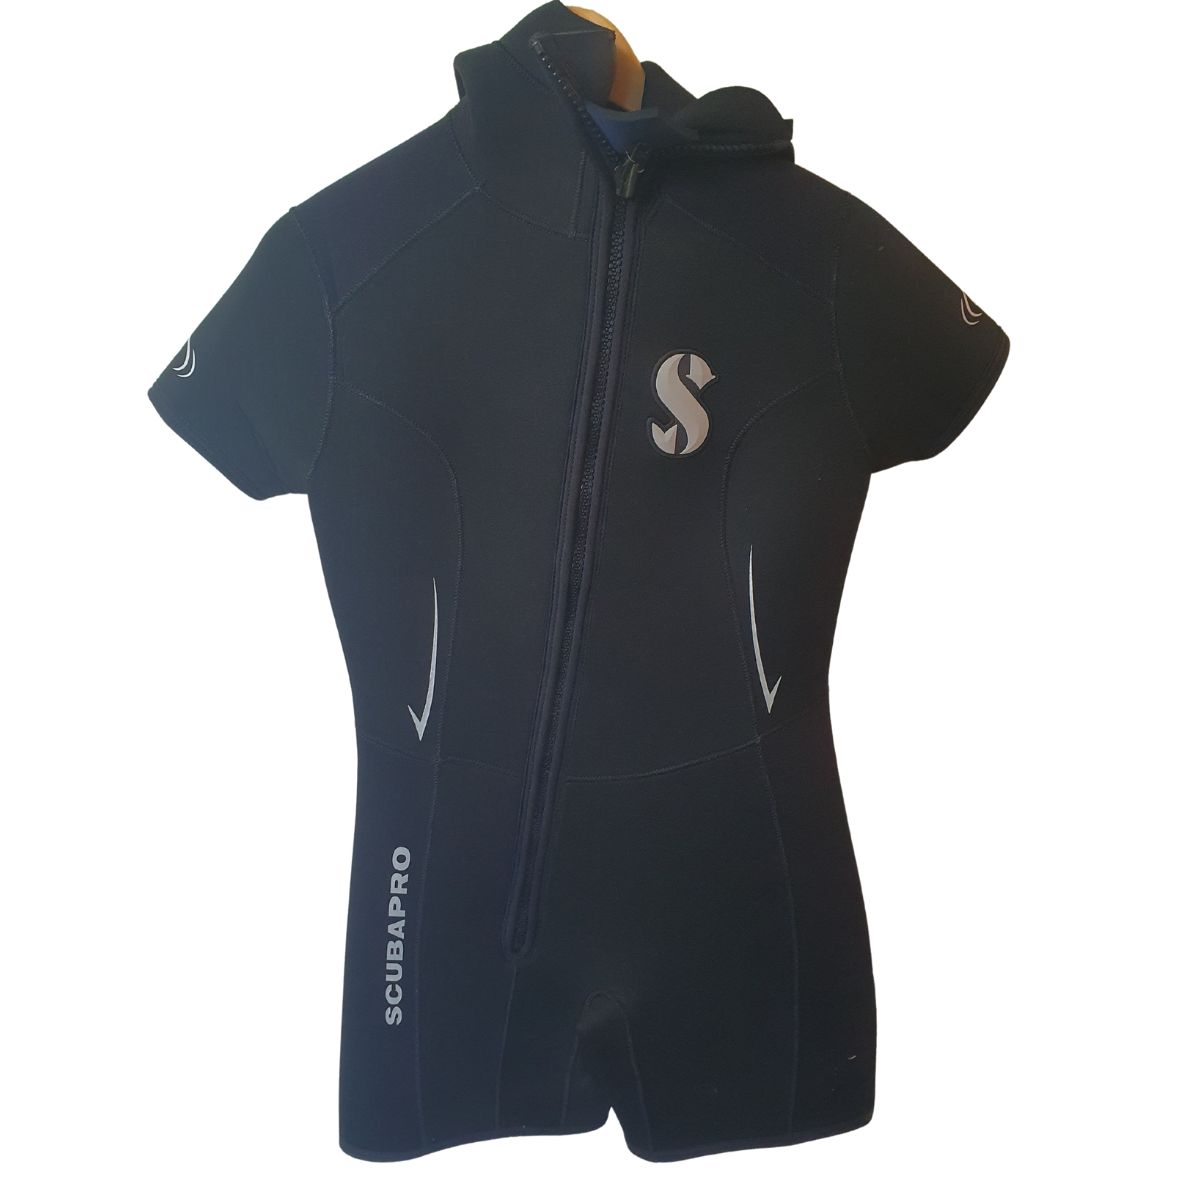 SCUBAPRO DEFINITION 6MM SHORTY WETSUIT SIZE WOMENS SMALL